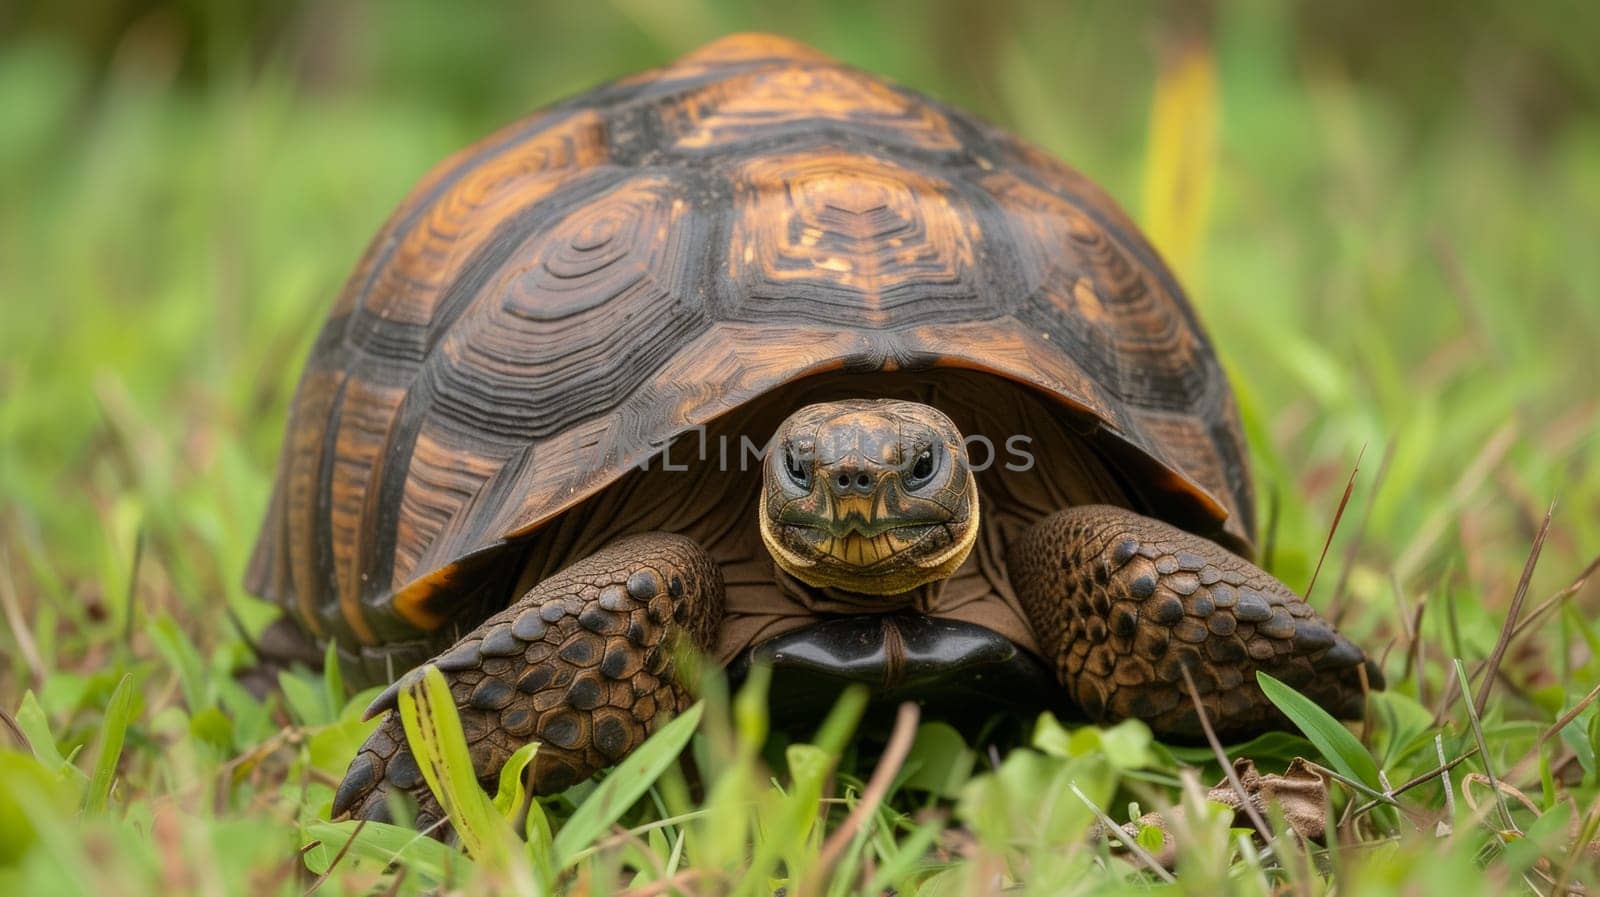 A turtle sitting in the grass with its head turned to look at something